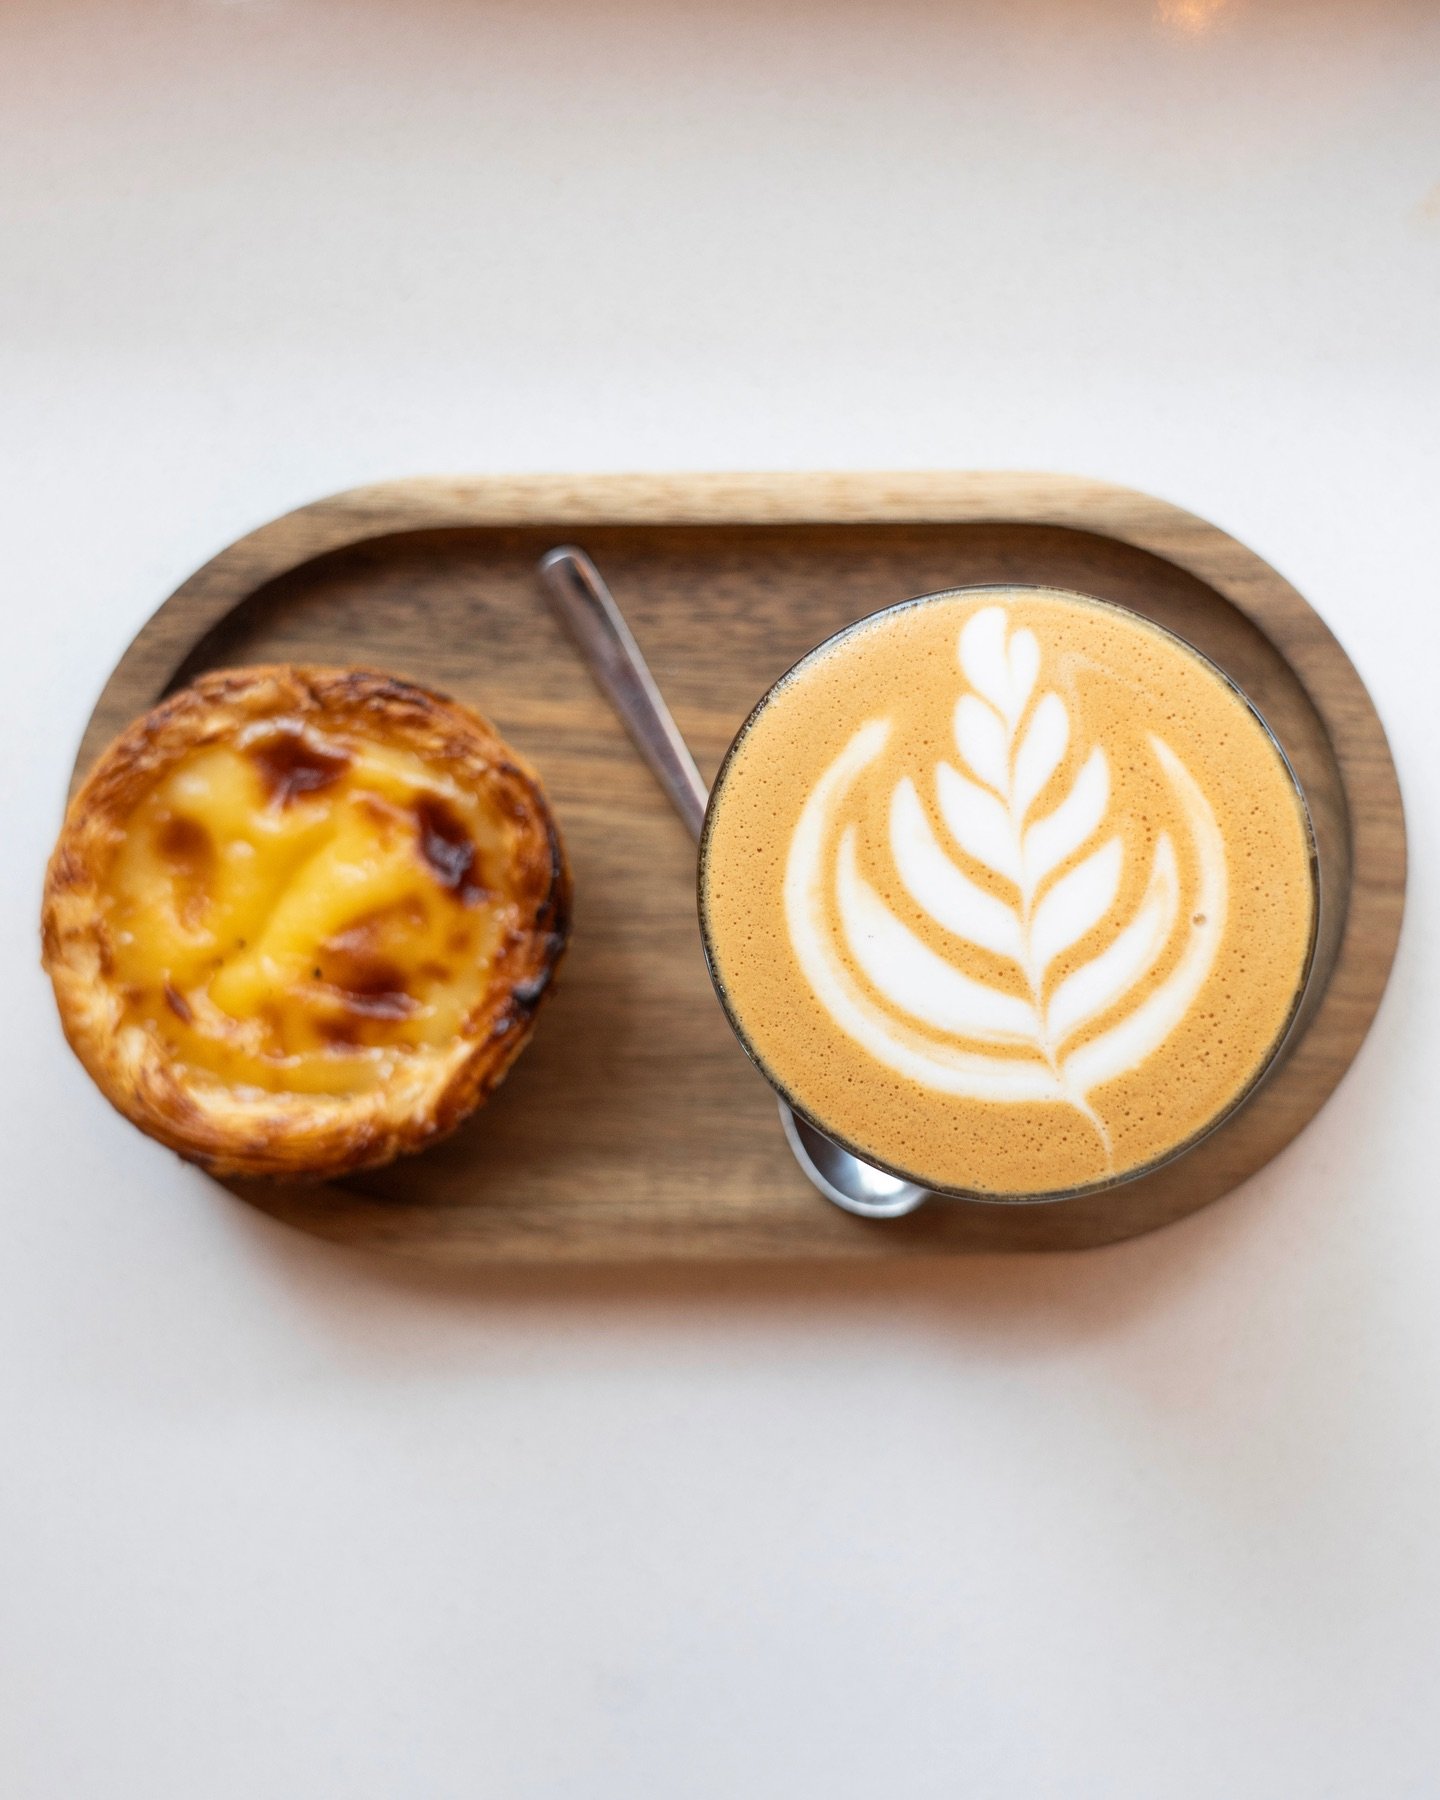 Mondays made better with a perfect pair: a warm cup of coffee and a delicious pastel de nata. ☕🥧 

#cafe #coffeeshop #pastadental #pastry #flatwhite